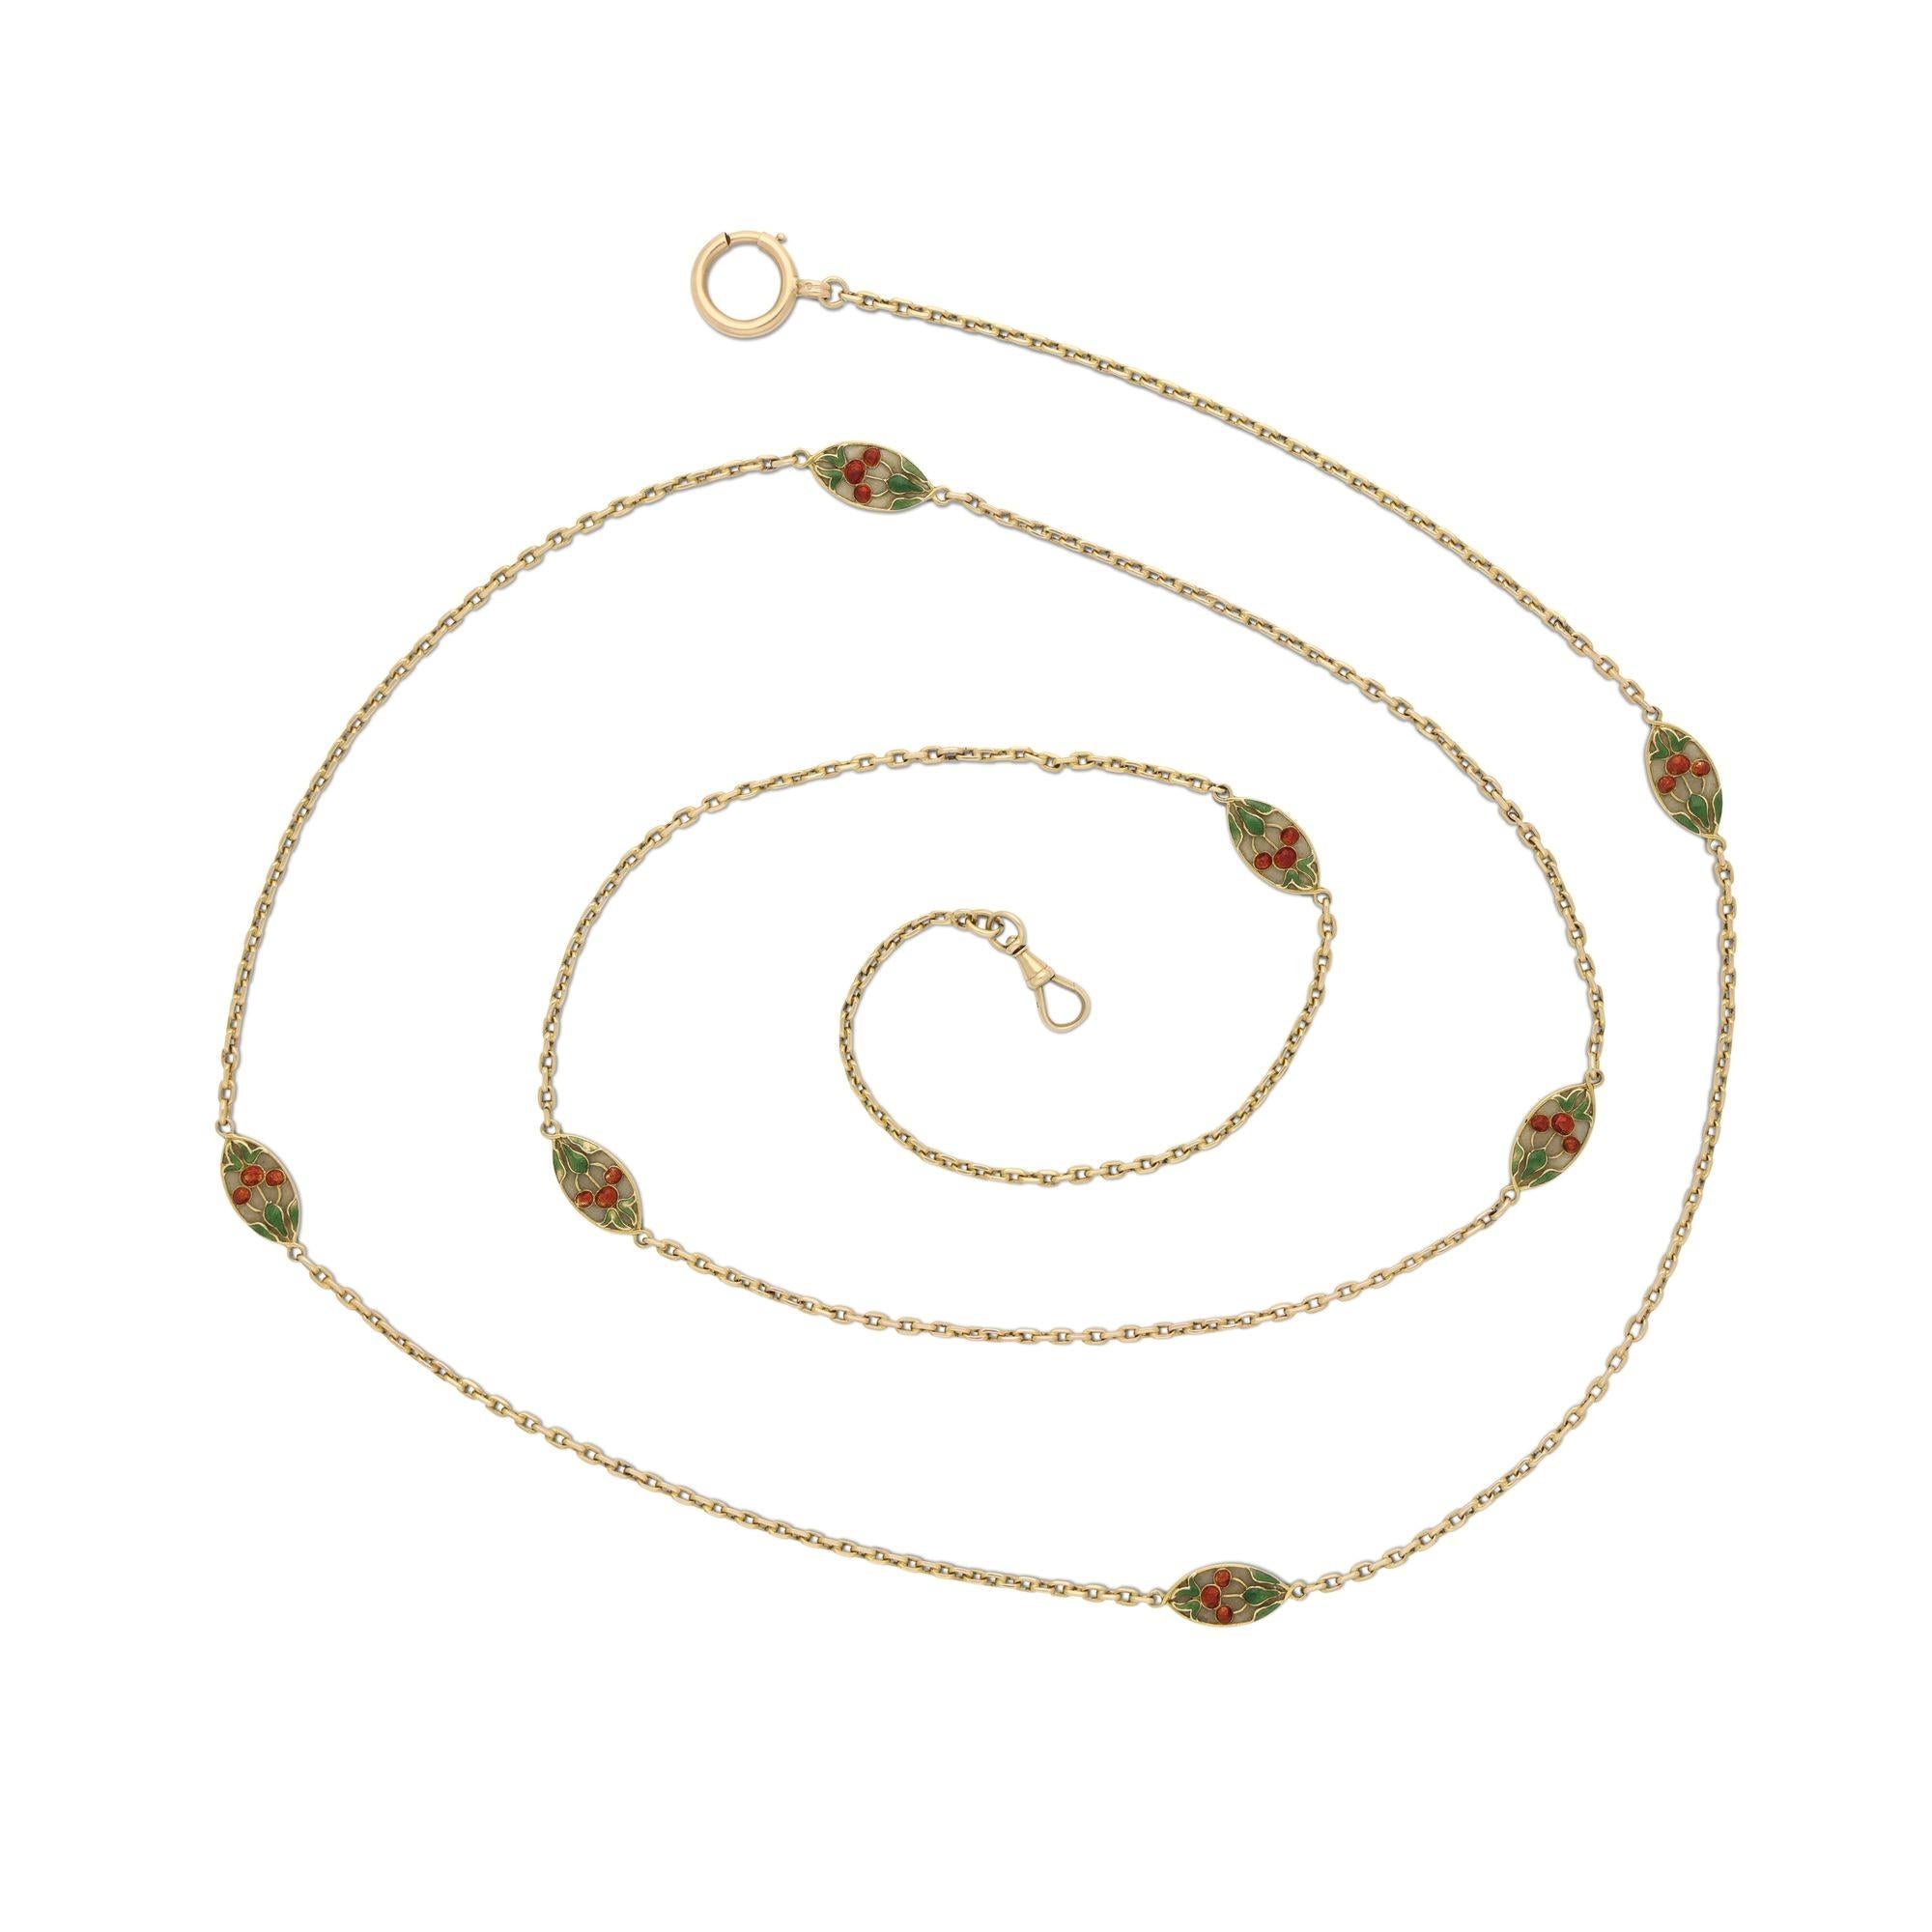 An antique gold and enamel long chain necklace c.1910, the necklace measuring 45” in length and formed of a continuous box-link chain interspersed at regular intervals with seven navette shaped panels decorated in red and green enamel with three